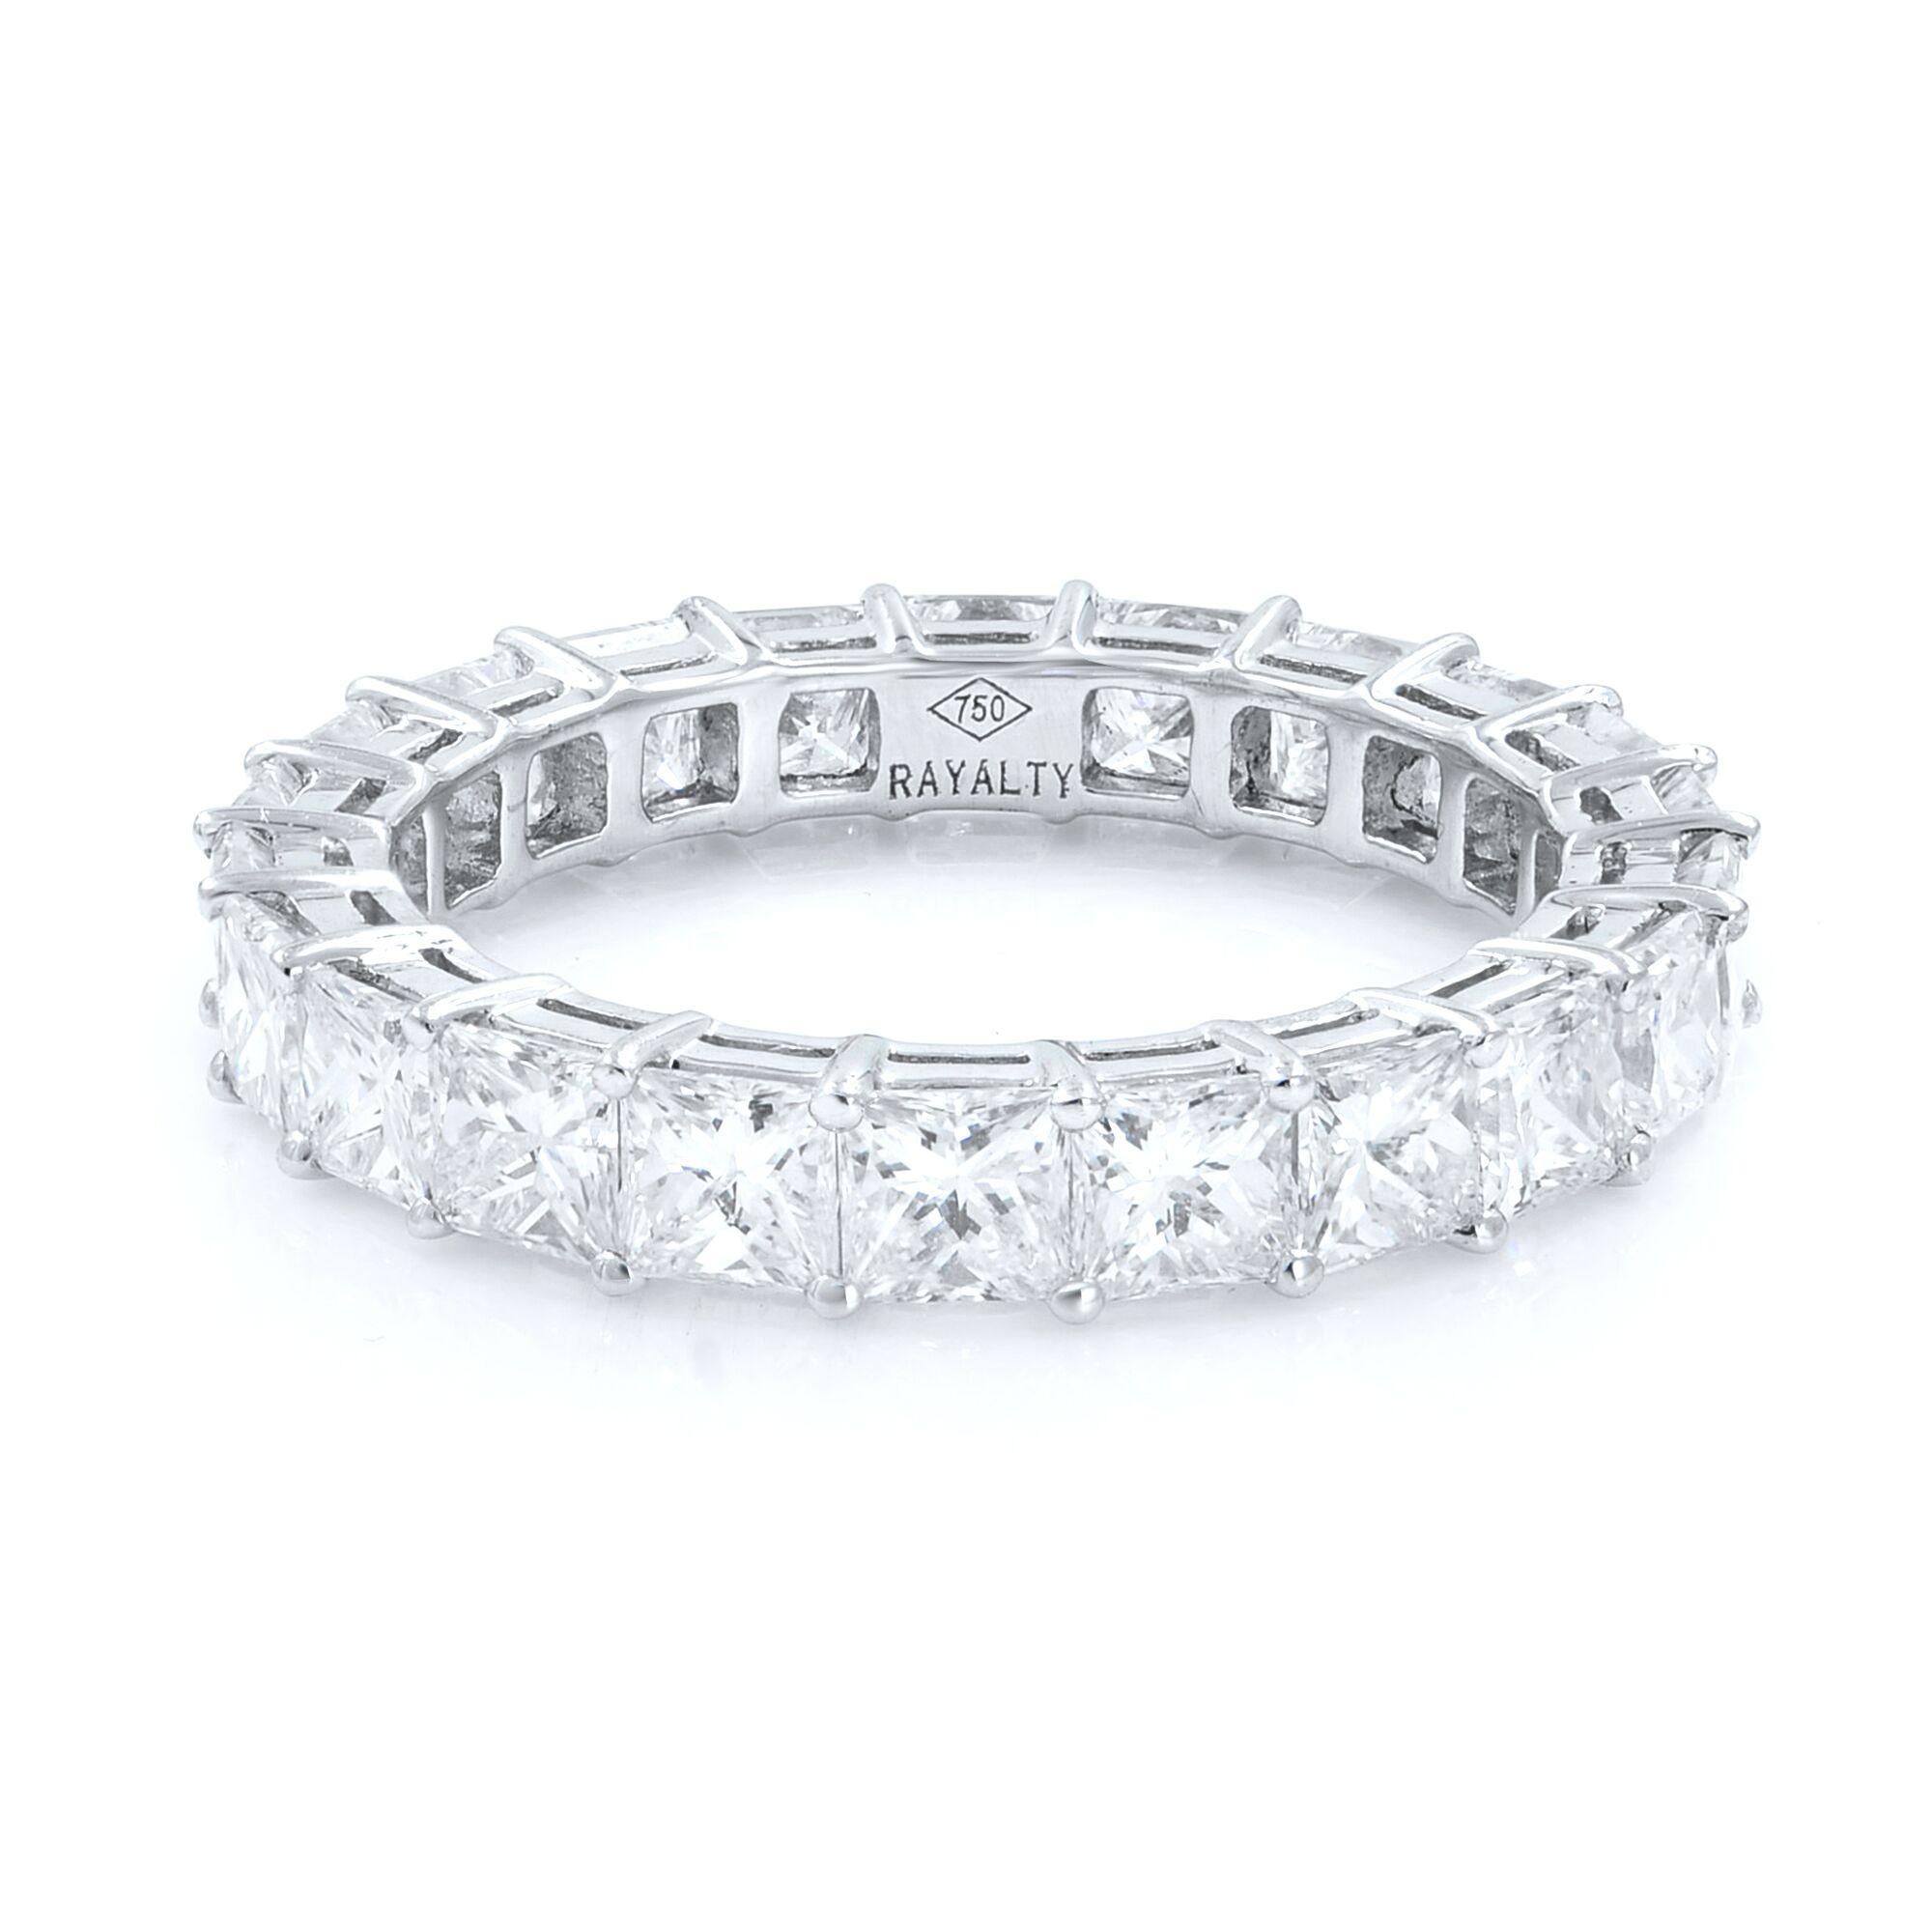 The princess cut diamond eternity band is a classic in the world of big diamond bling. This 3.36ct princess cut wedding eternity band is just what any diamond lover needs.
Size: 6